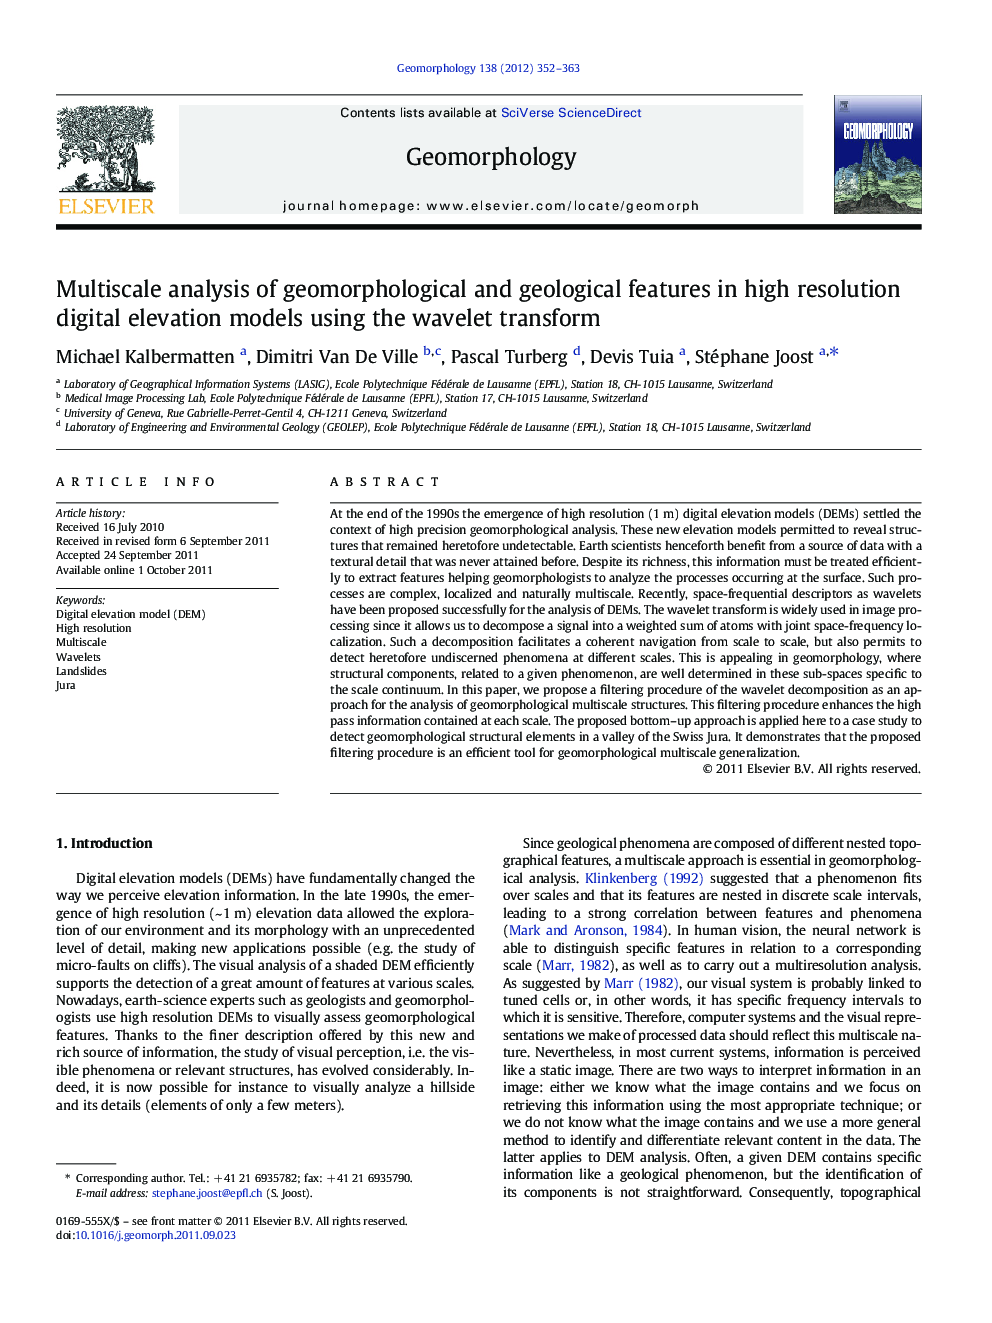 Multiscale analysis of geomorphological and geological features in high resolution digital elevation models using the wavelet transform